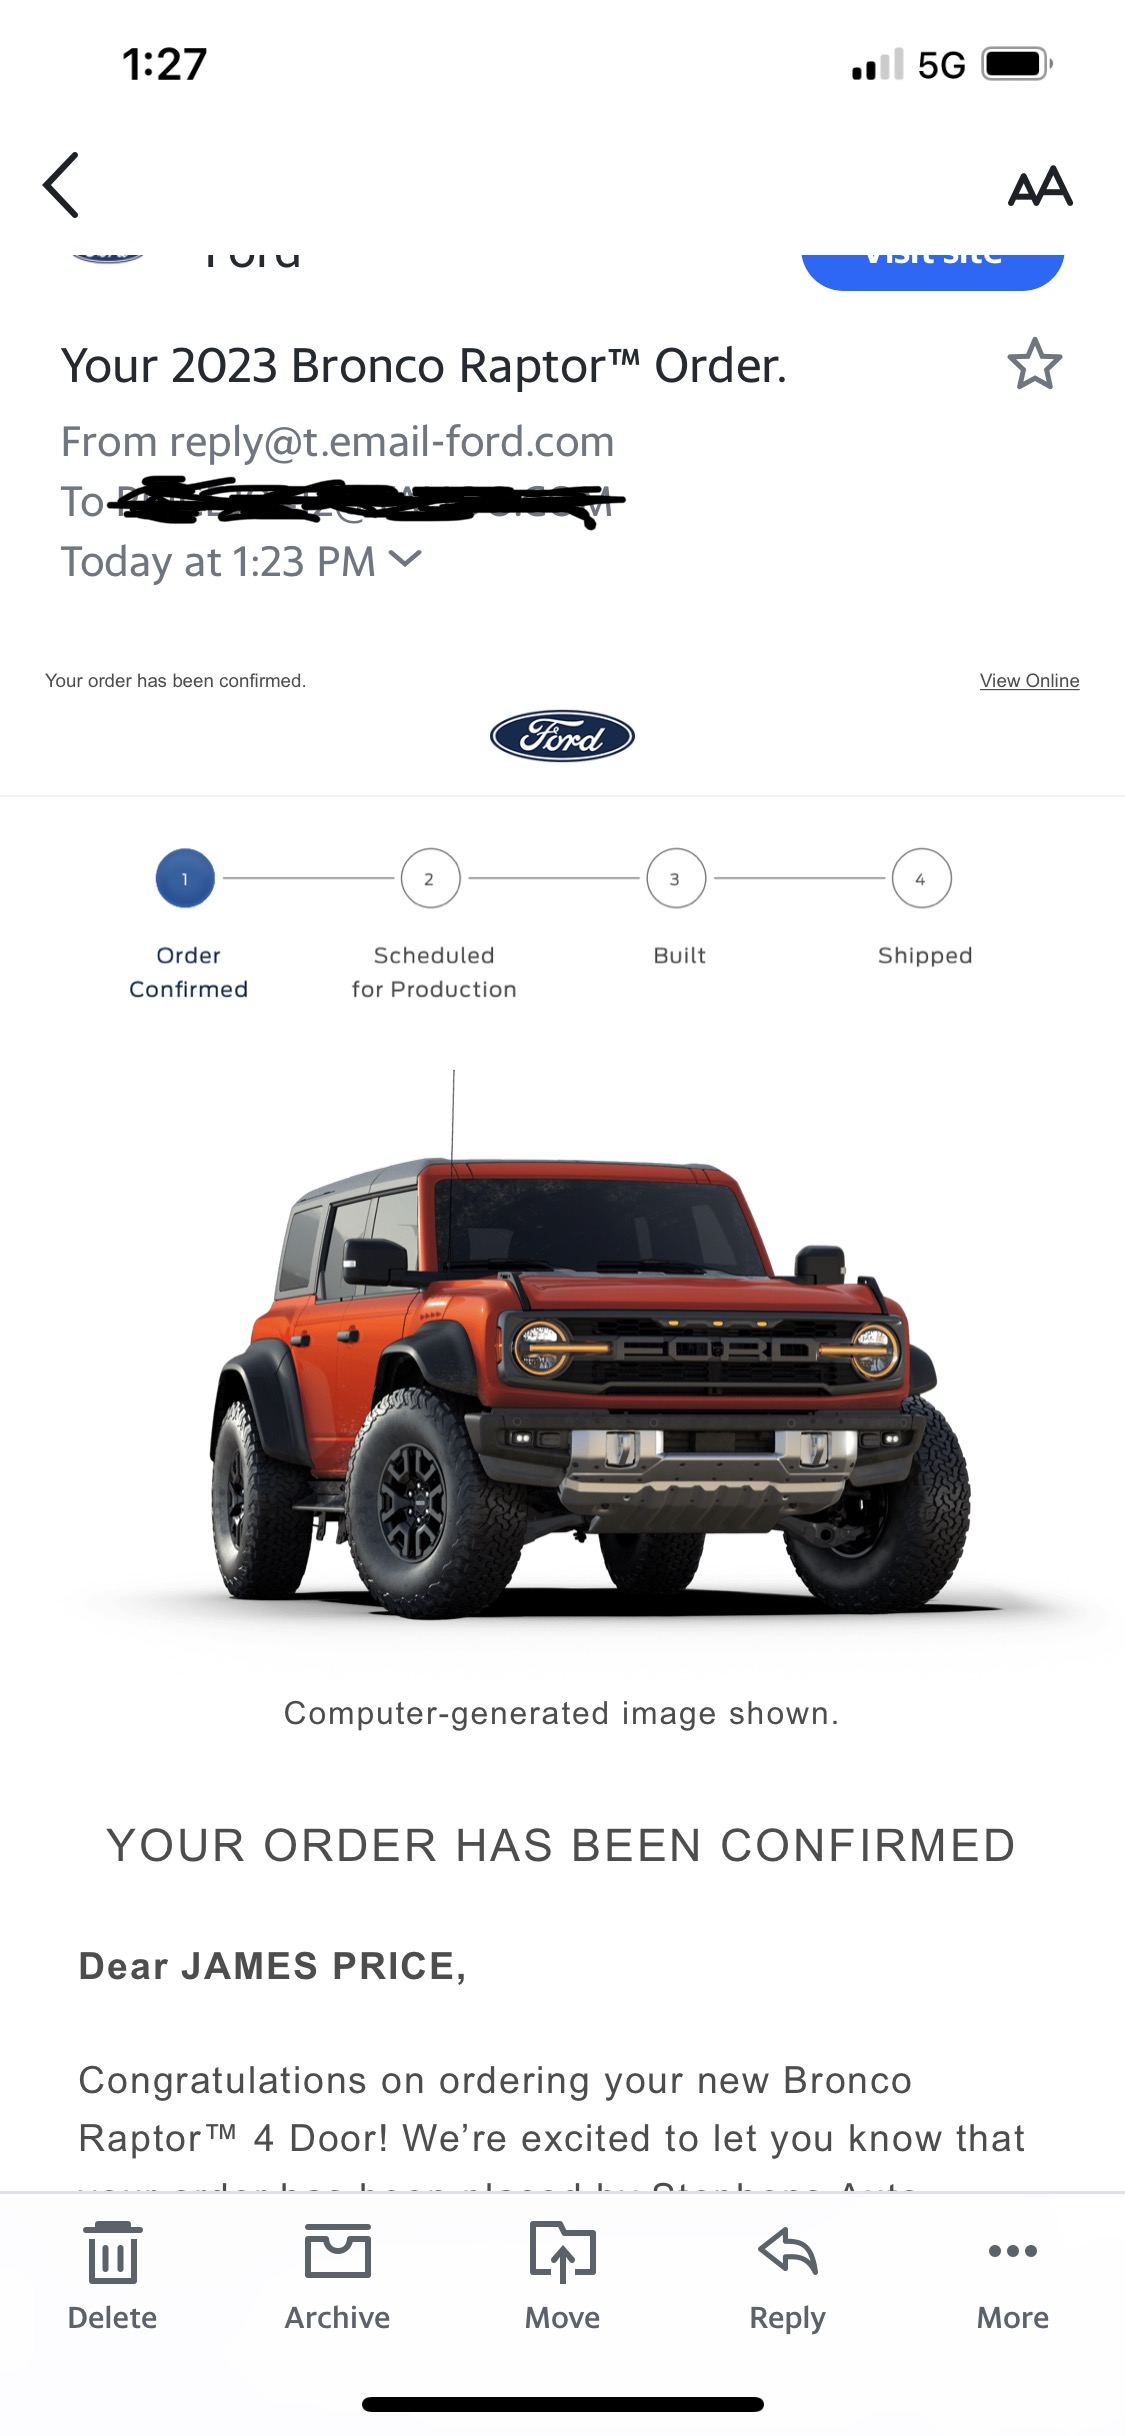 Ford Bronco Does a "Your 2023 Bronco Raptor™ Order." email mean anything? 17C493FC-8BA5-4BFD-9CC8-2EA250D4E1C7